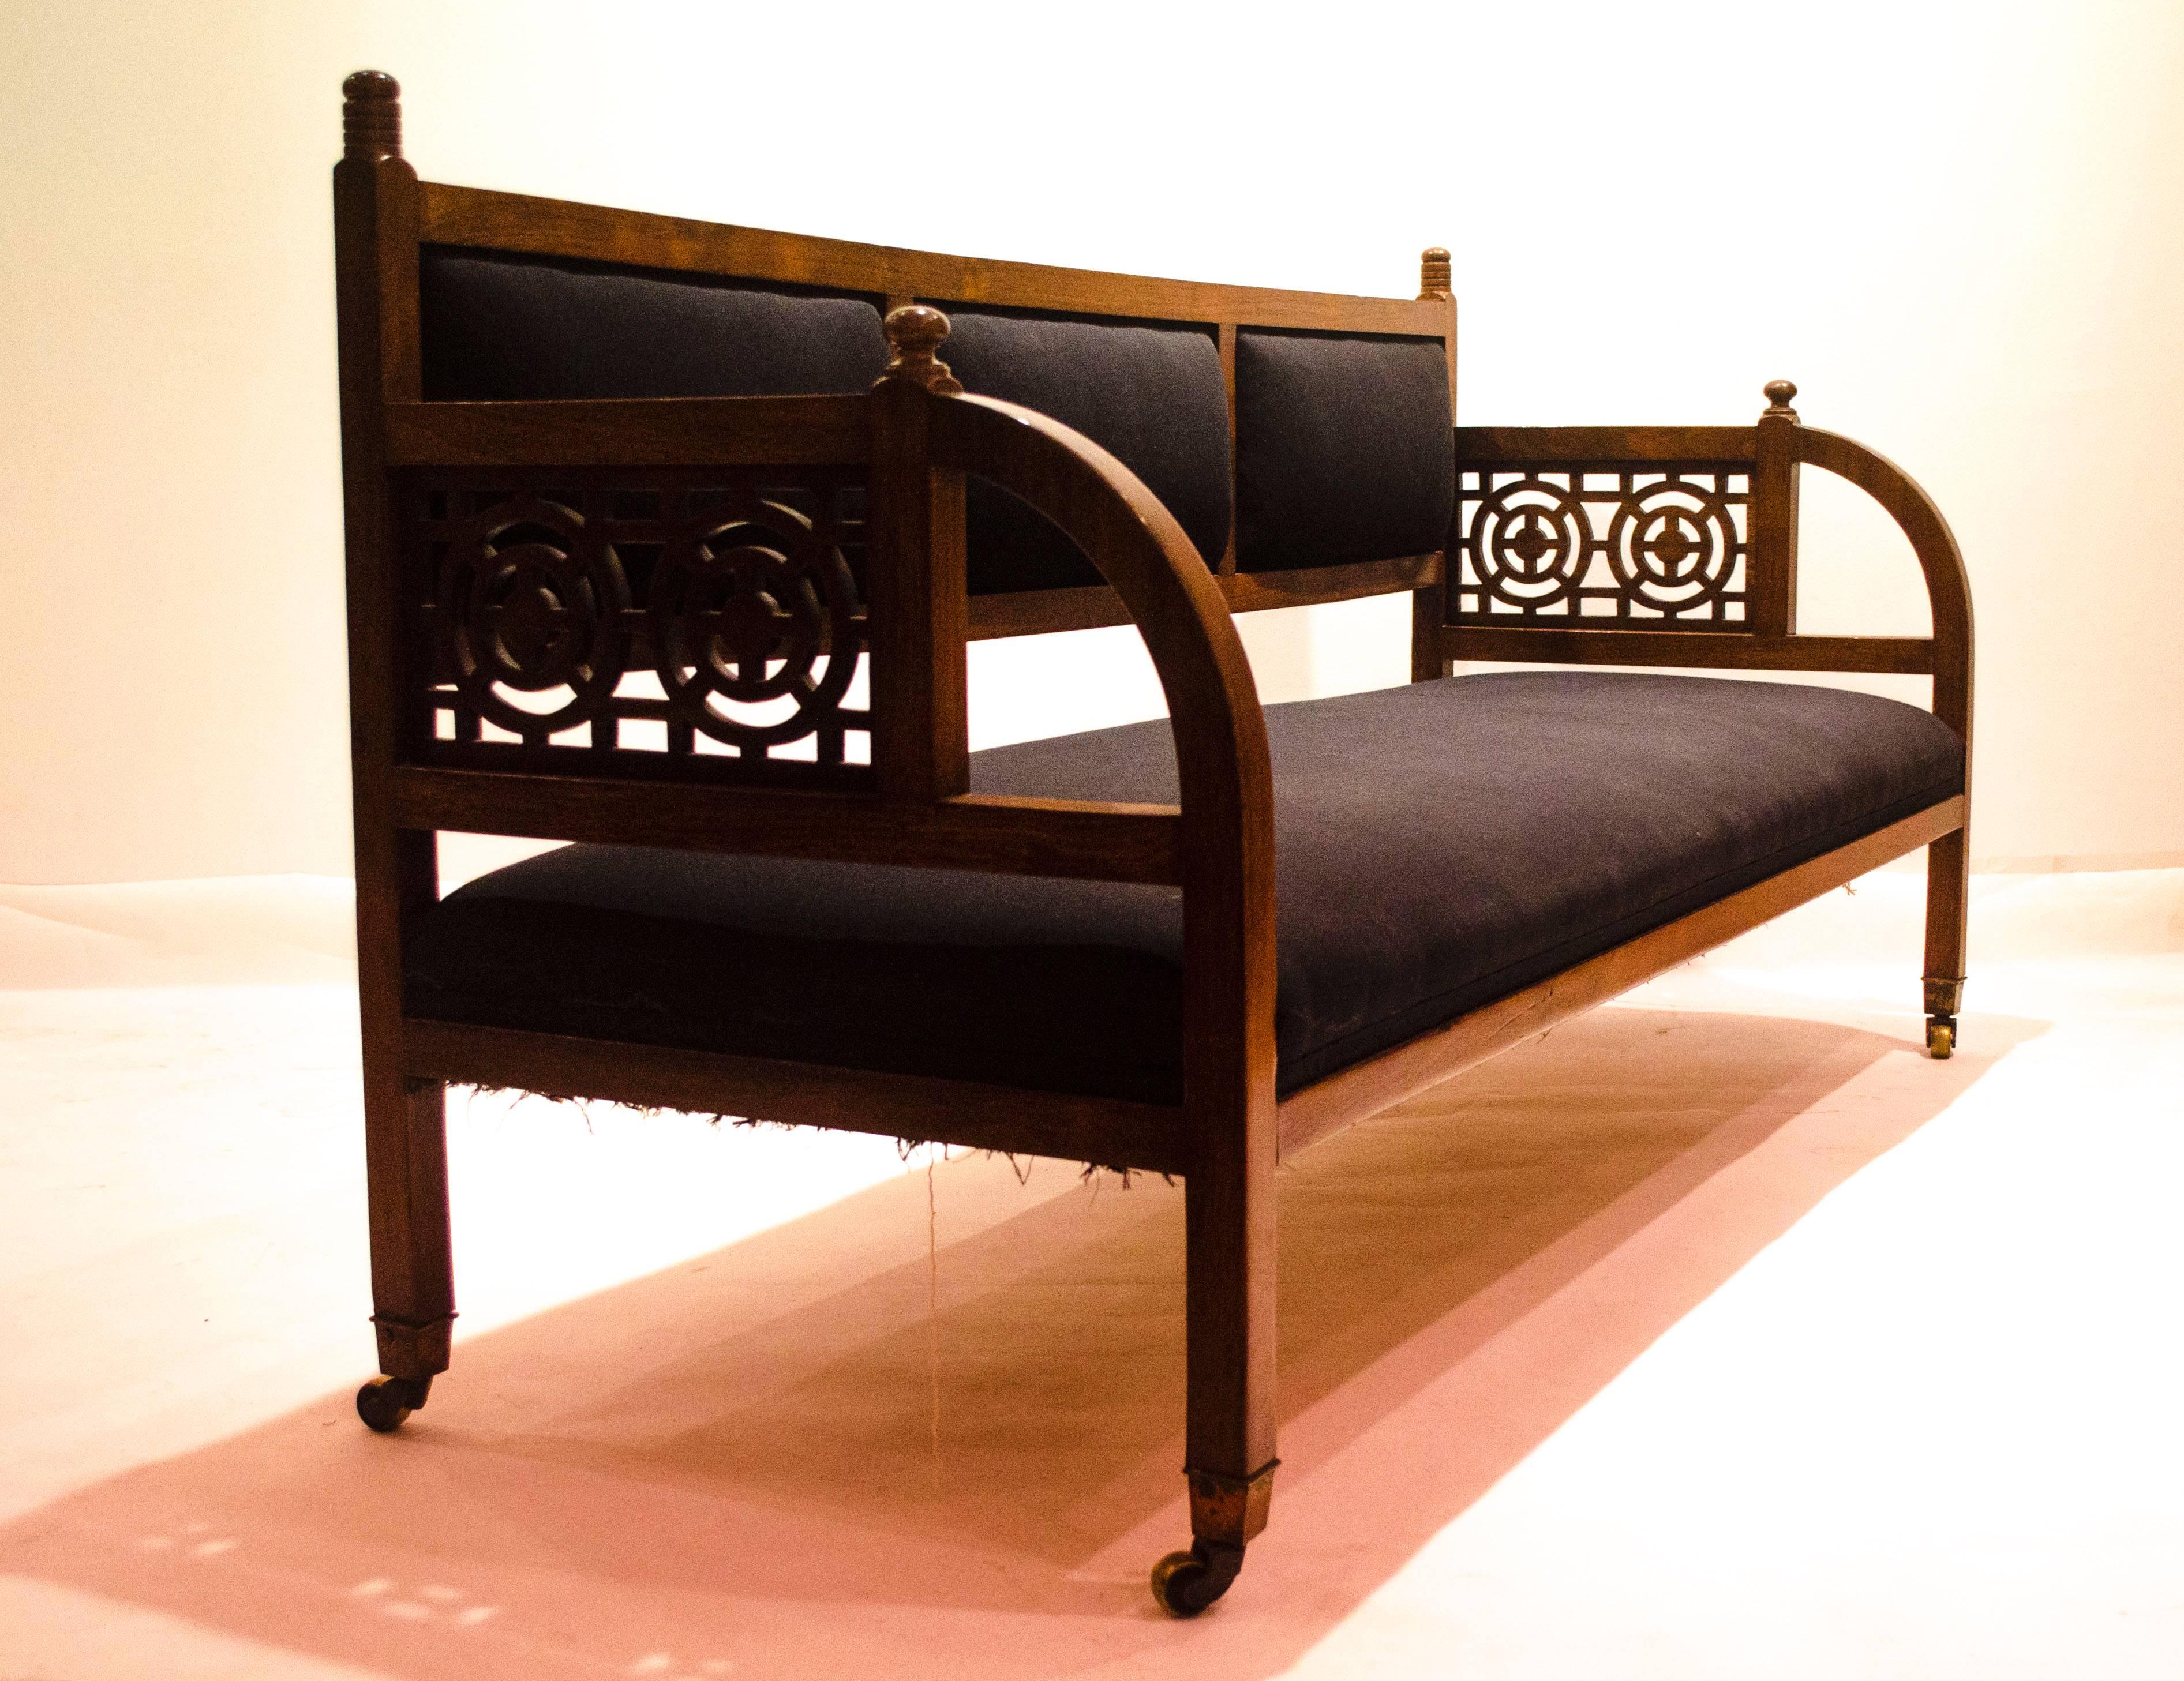 Edward William Godwin. A rare Anglo-Japanese walnut settee originally designed for Dromore Castle, County Limerick, for Lord Limerick.
A similar example of the present lot is in the collections of the Victoria and Albert Museum, London and Bristol